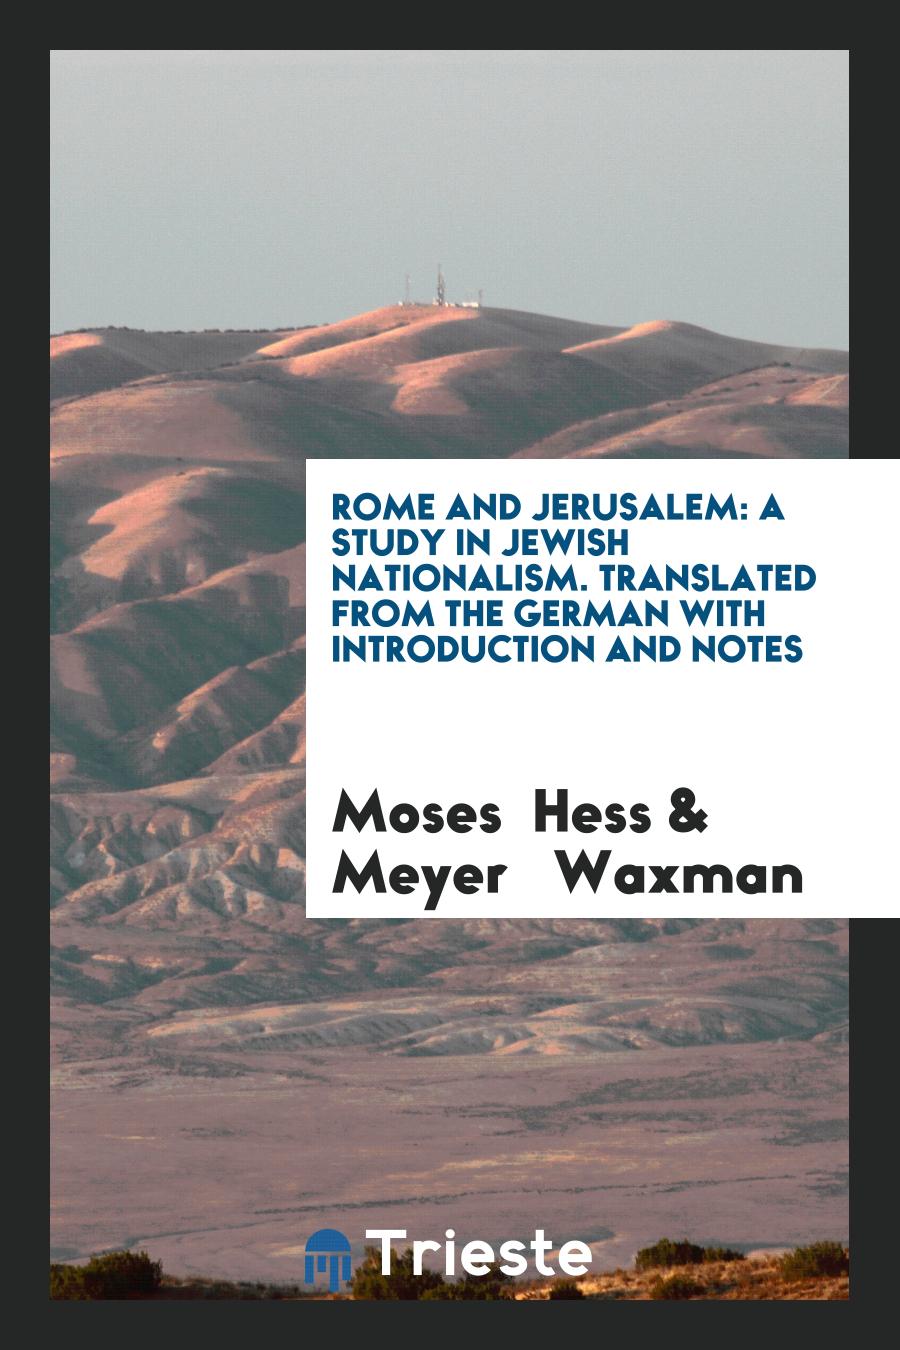 Rome and Jerusalem: A Study in Jewish Nationalism. Translated from the German with Introduction and Notes